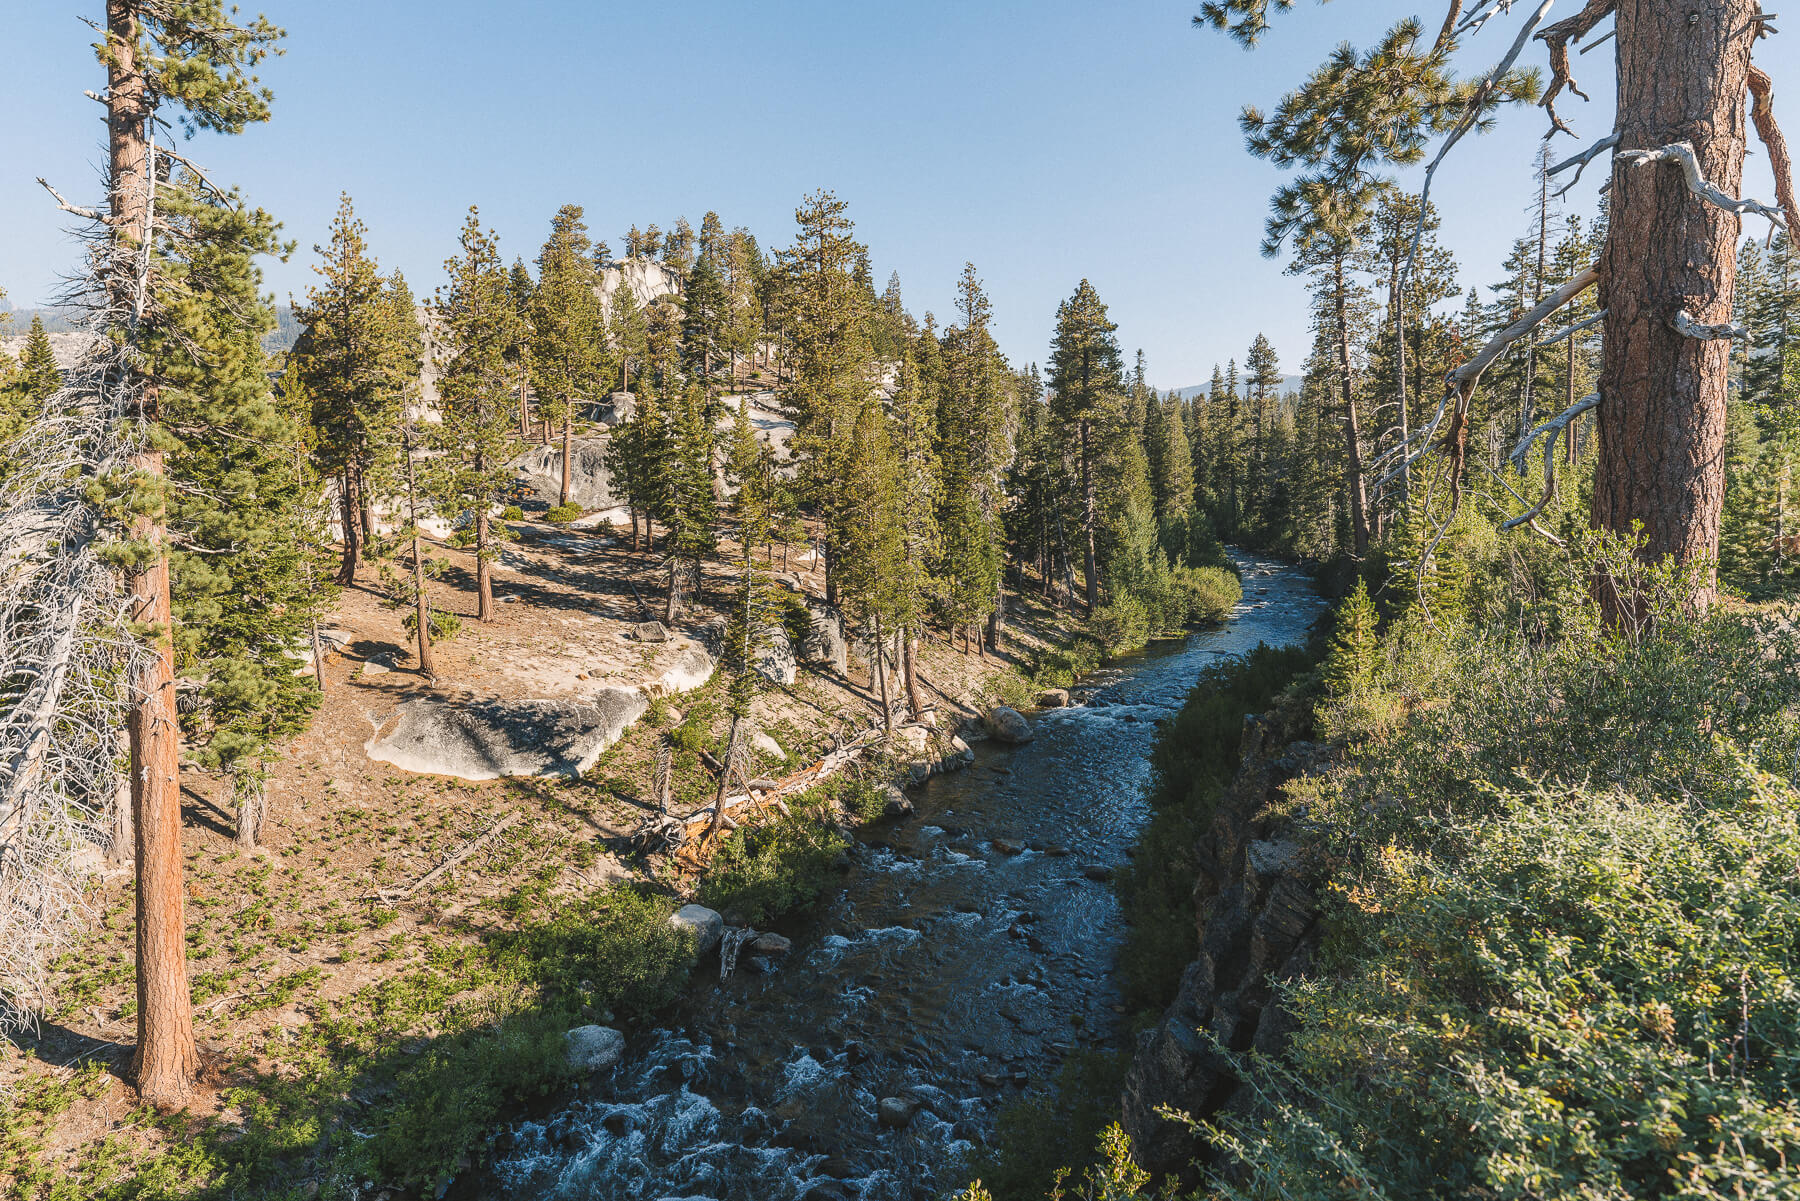 The Middle Fork of the San Joaquin River.